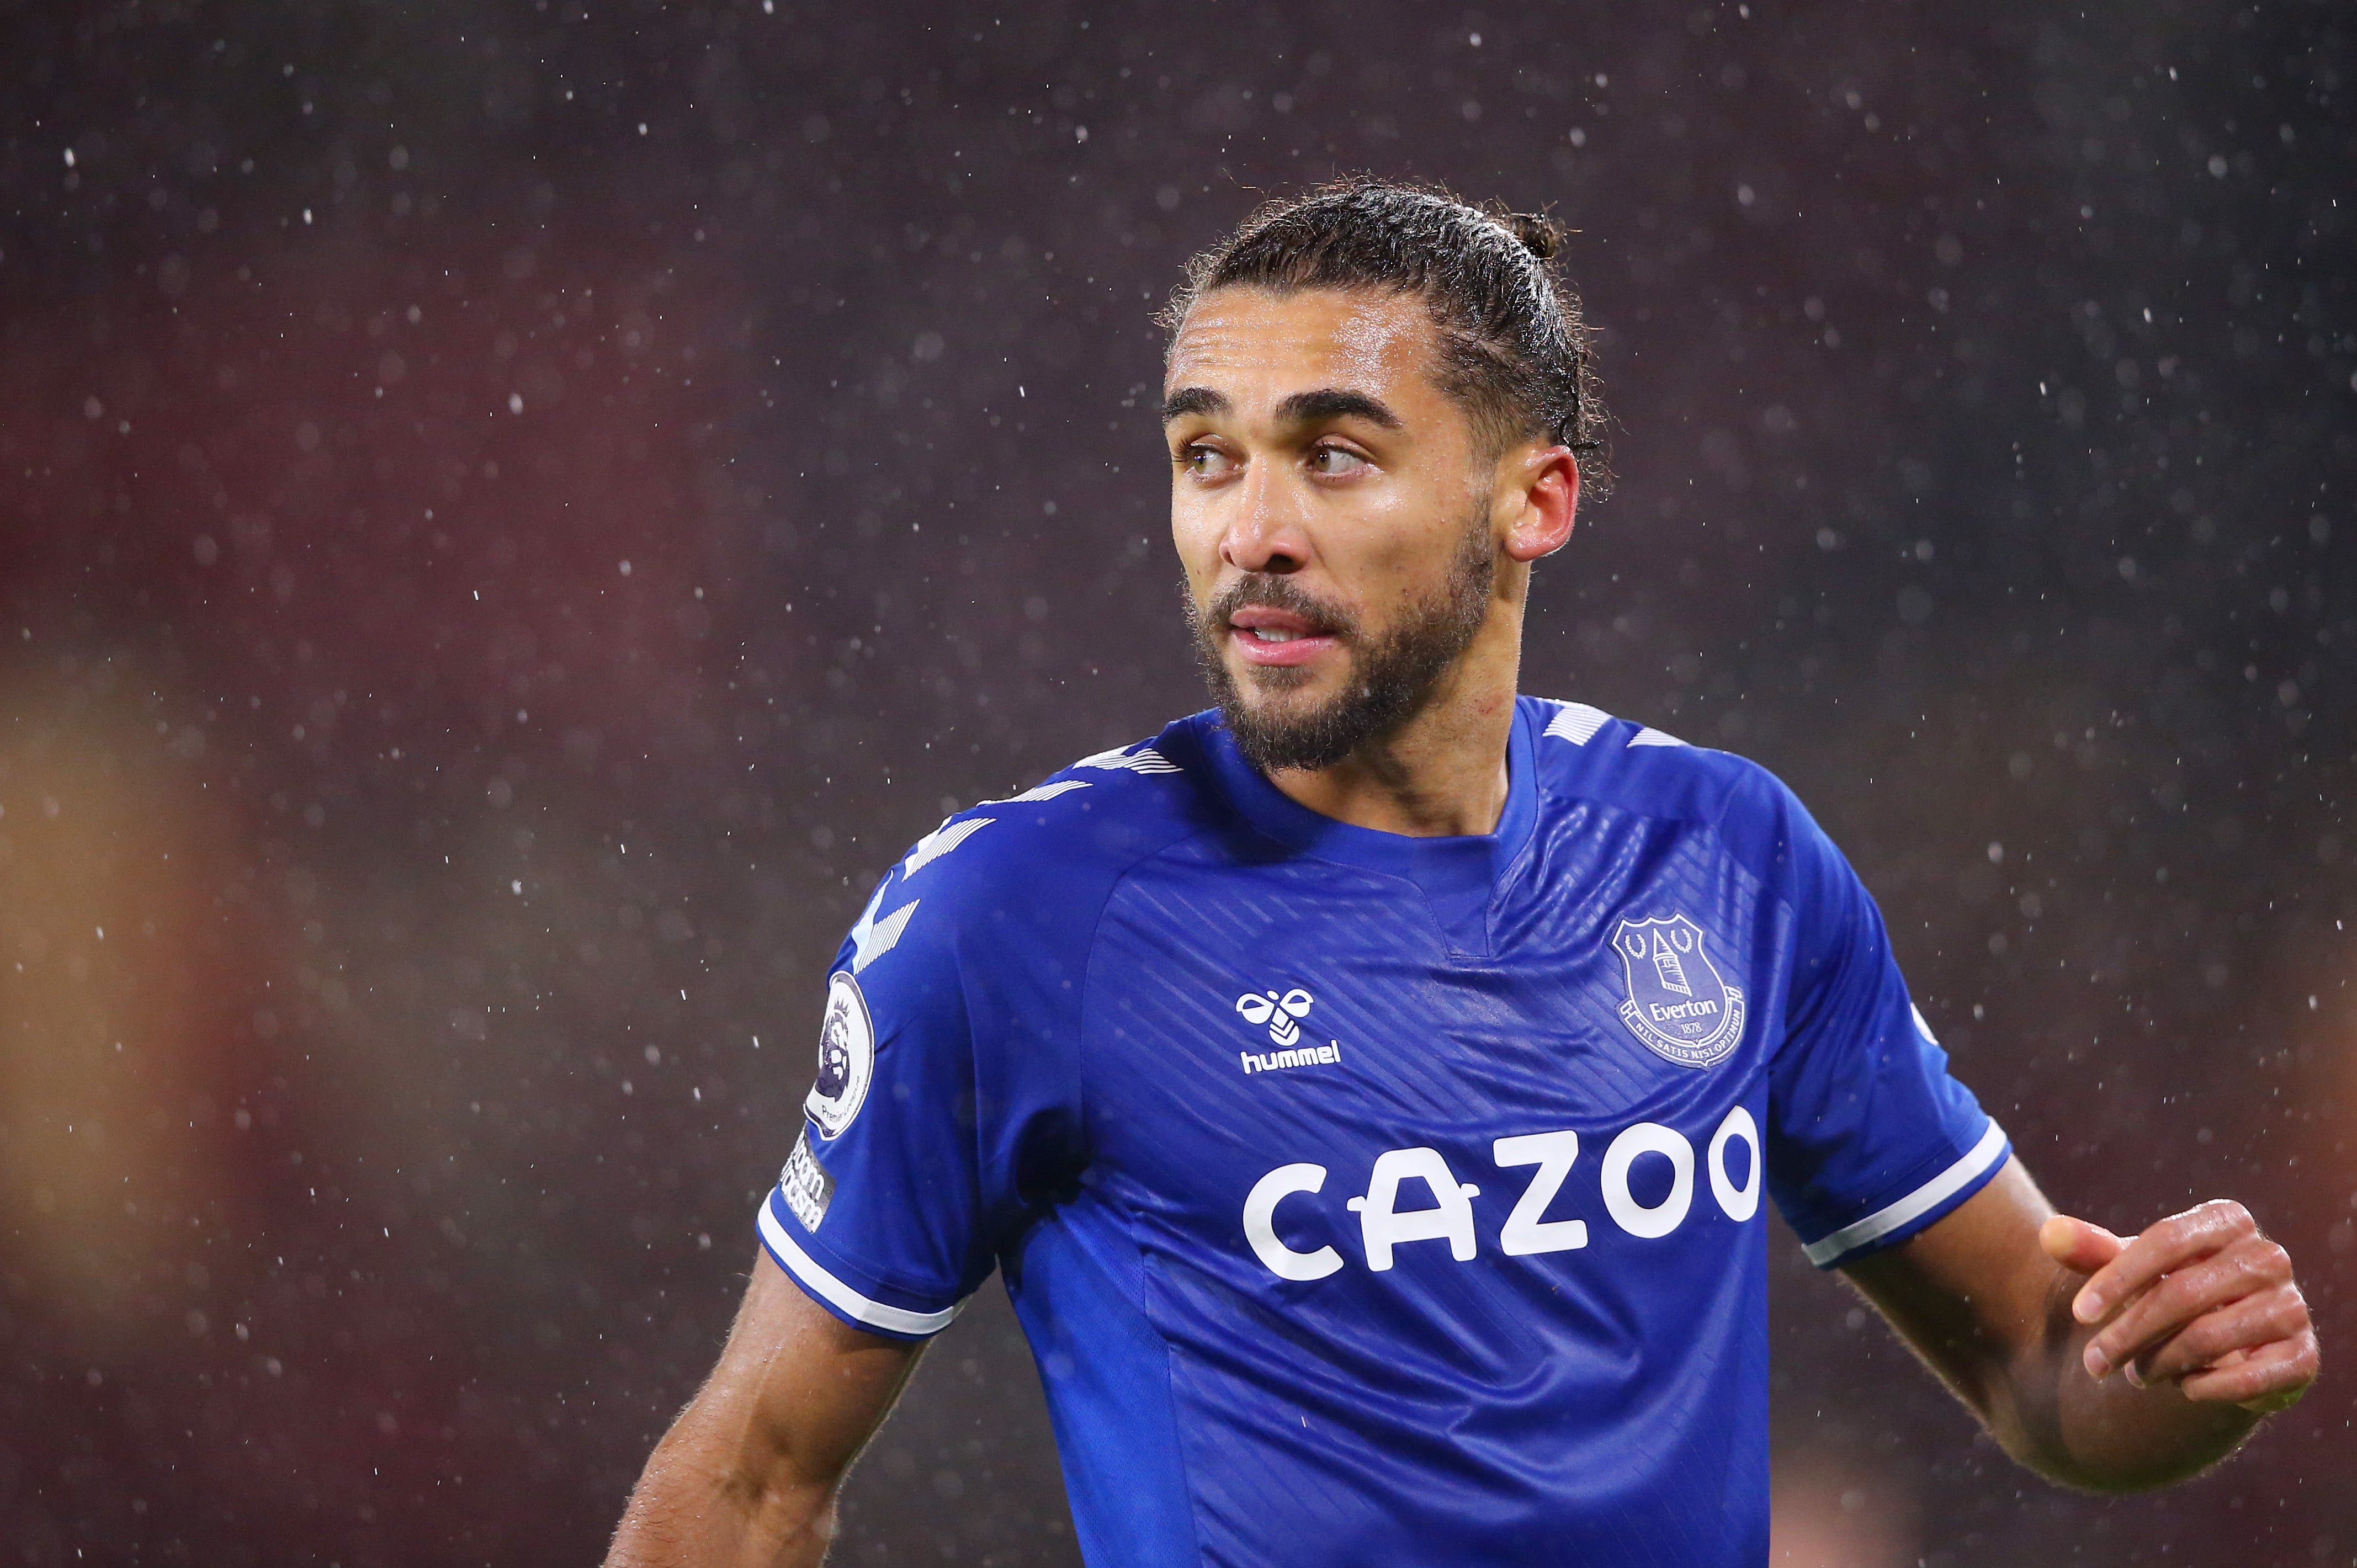 Dominic Calvert-Lewin has picked up an injury